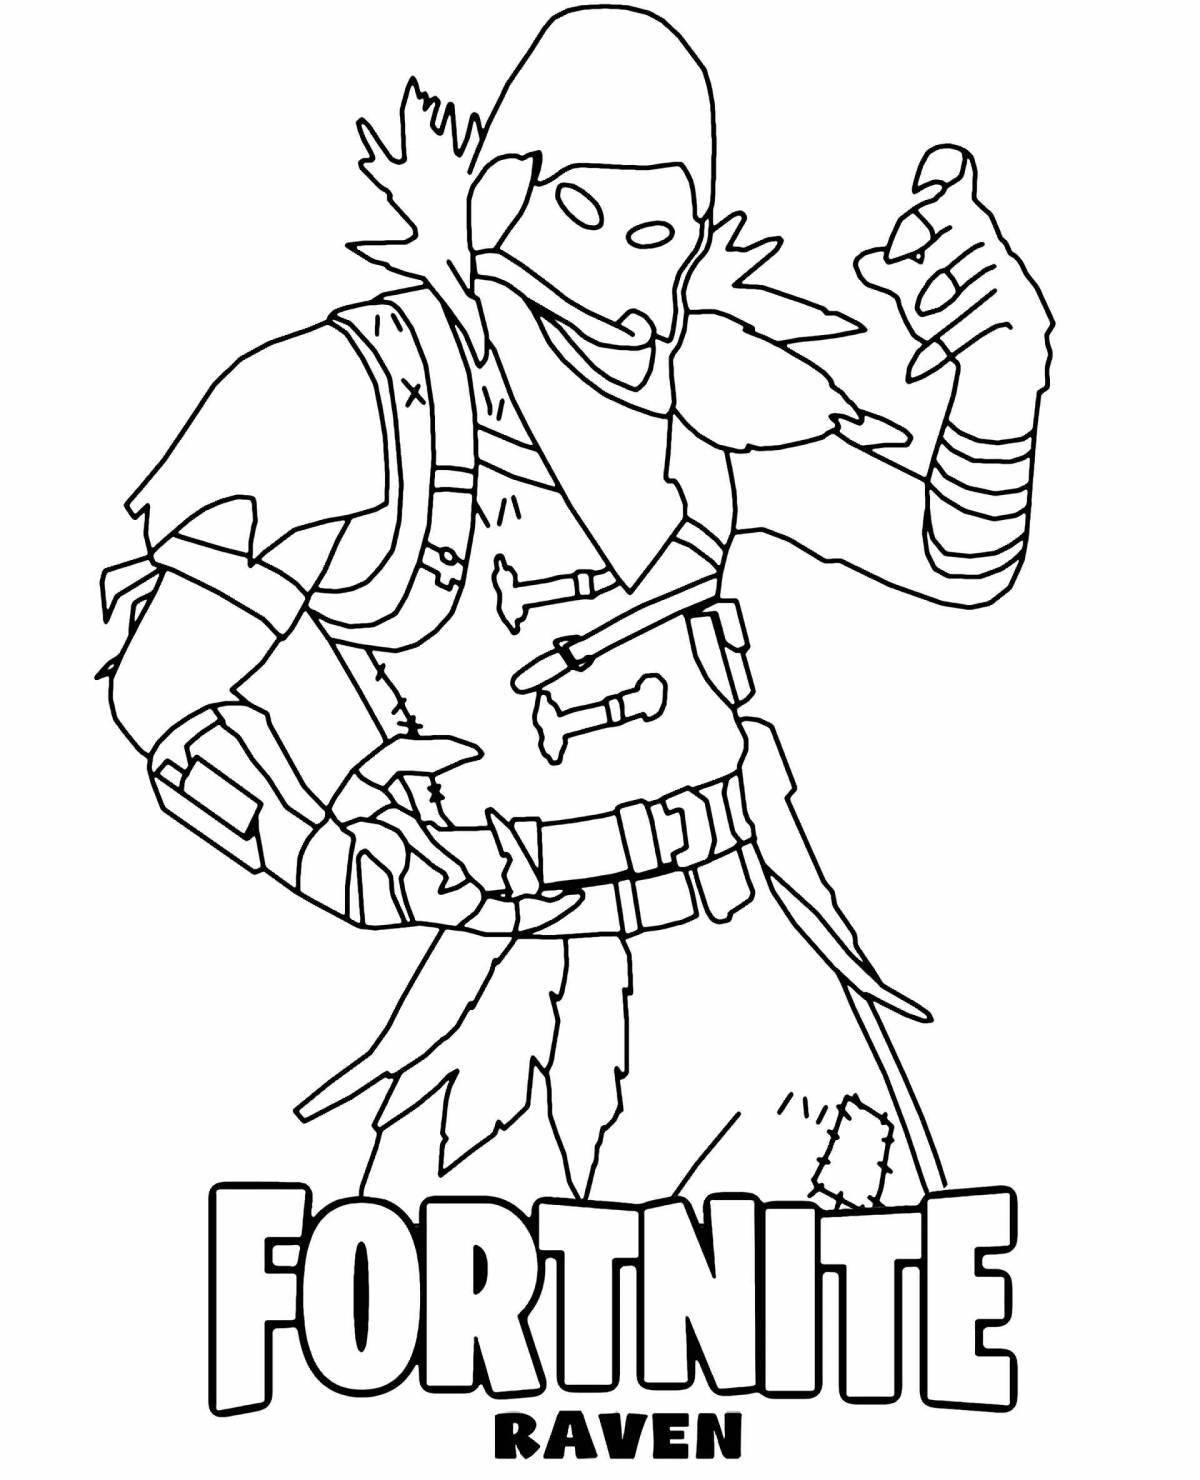 Awesome fortnite coloring book for boys